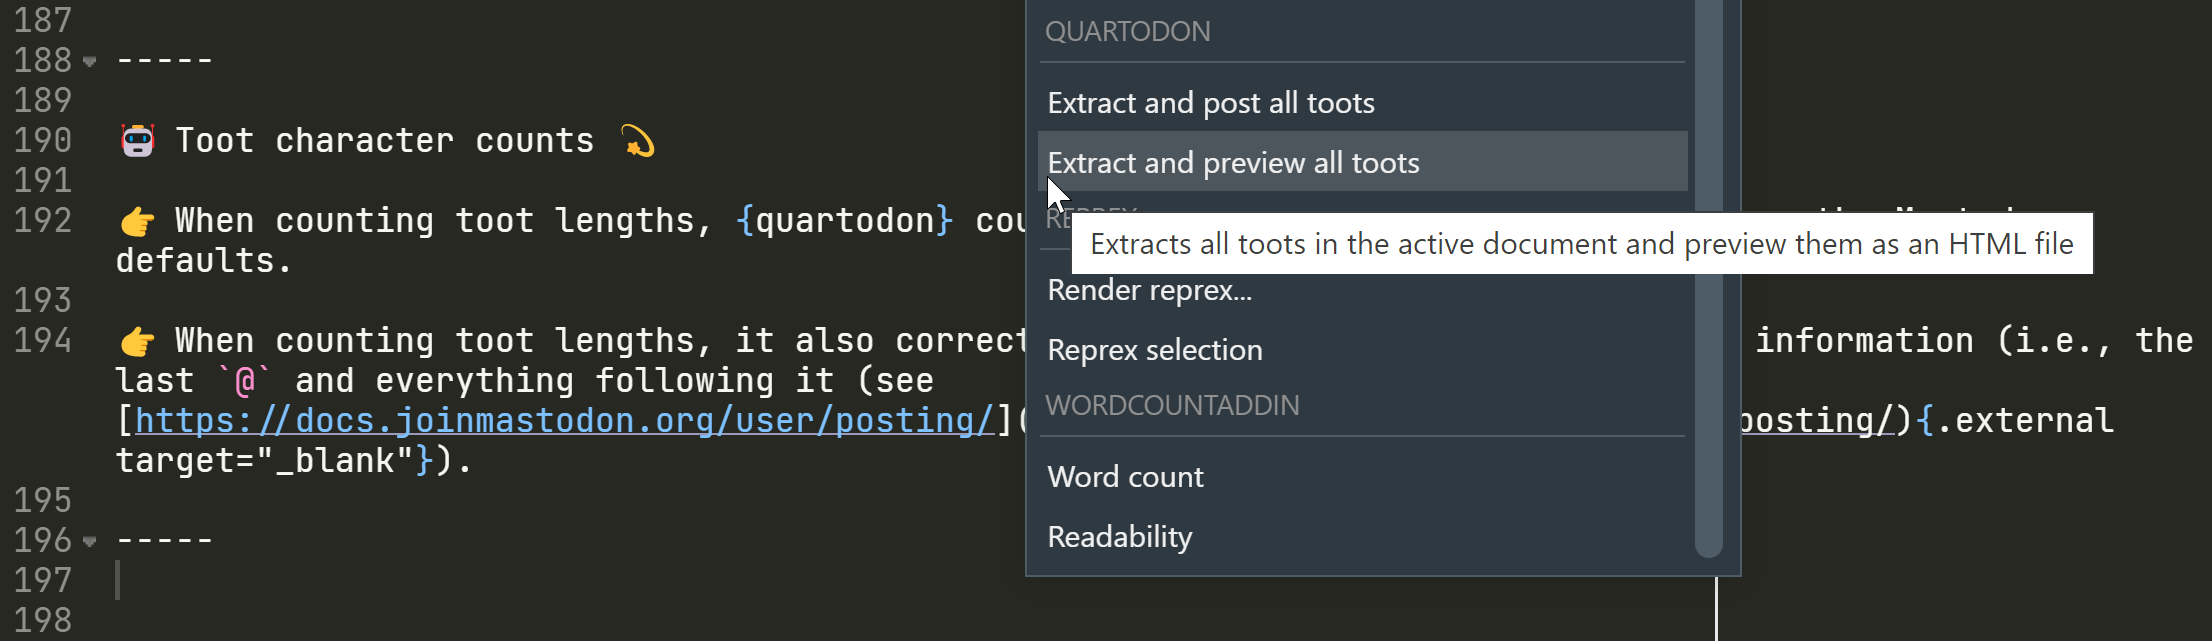 A screenshot of RStudio showing the Addins menu, with the cursor hovering over the 'Extract and preview all toots' option, with the Quarto blog post containing the toots in this thread.